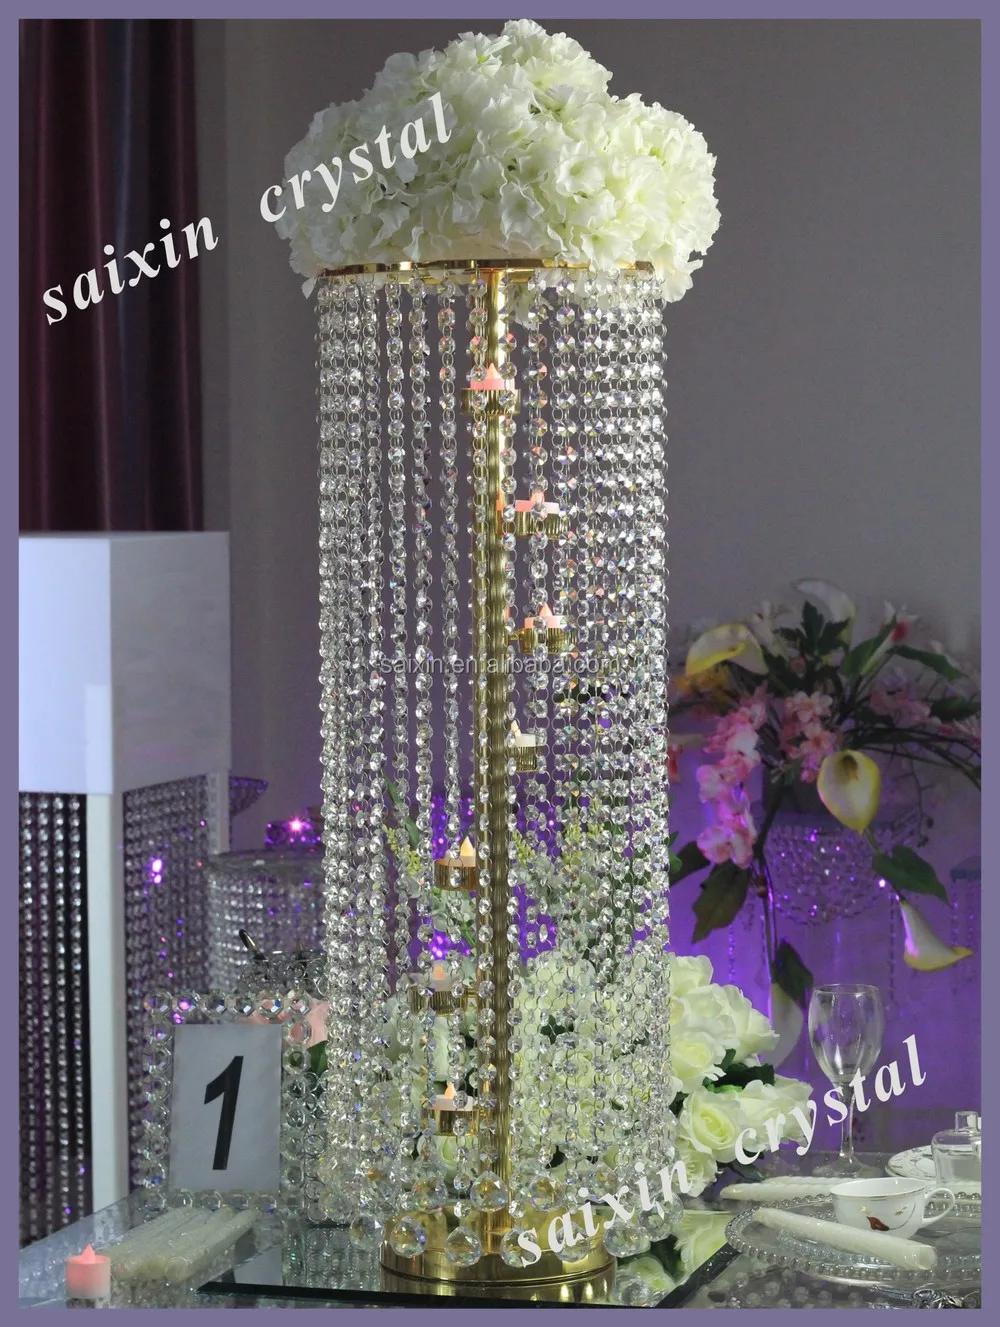 electric light table top crystal candelabra